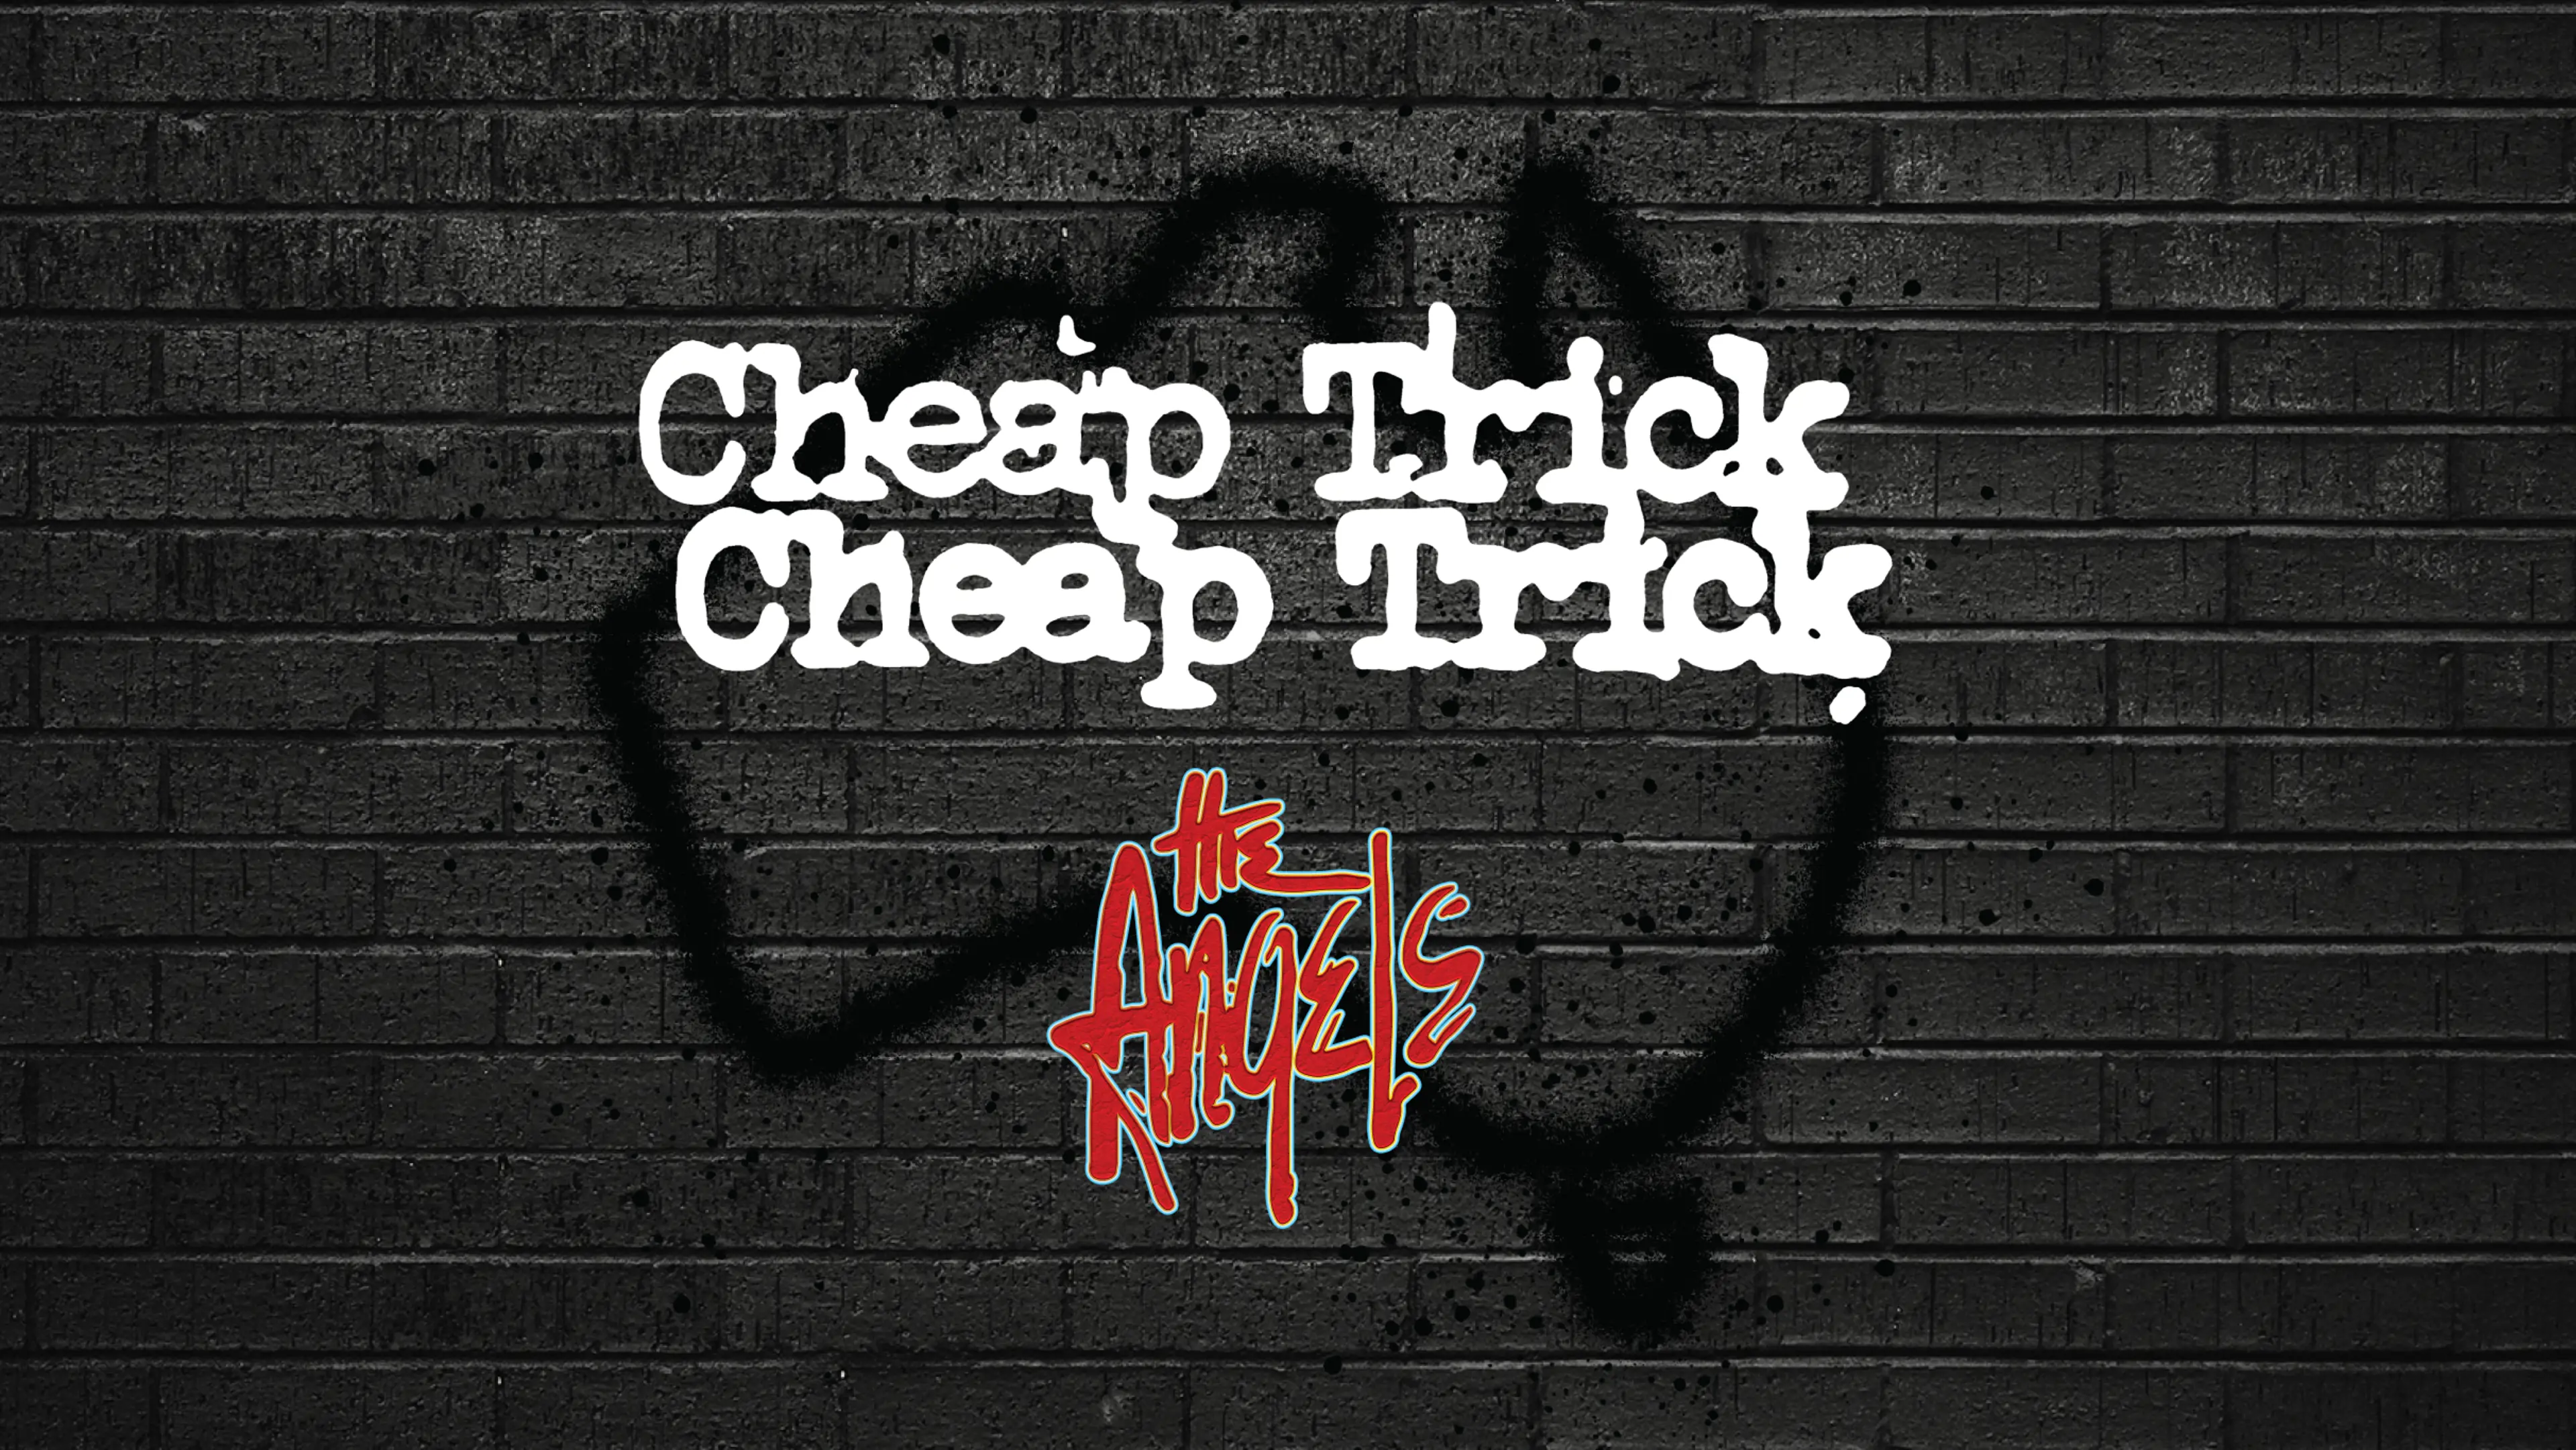 Cheap Trick & The Angels